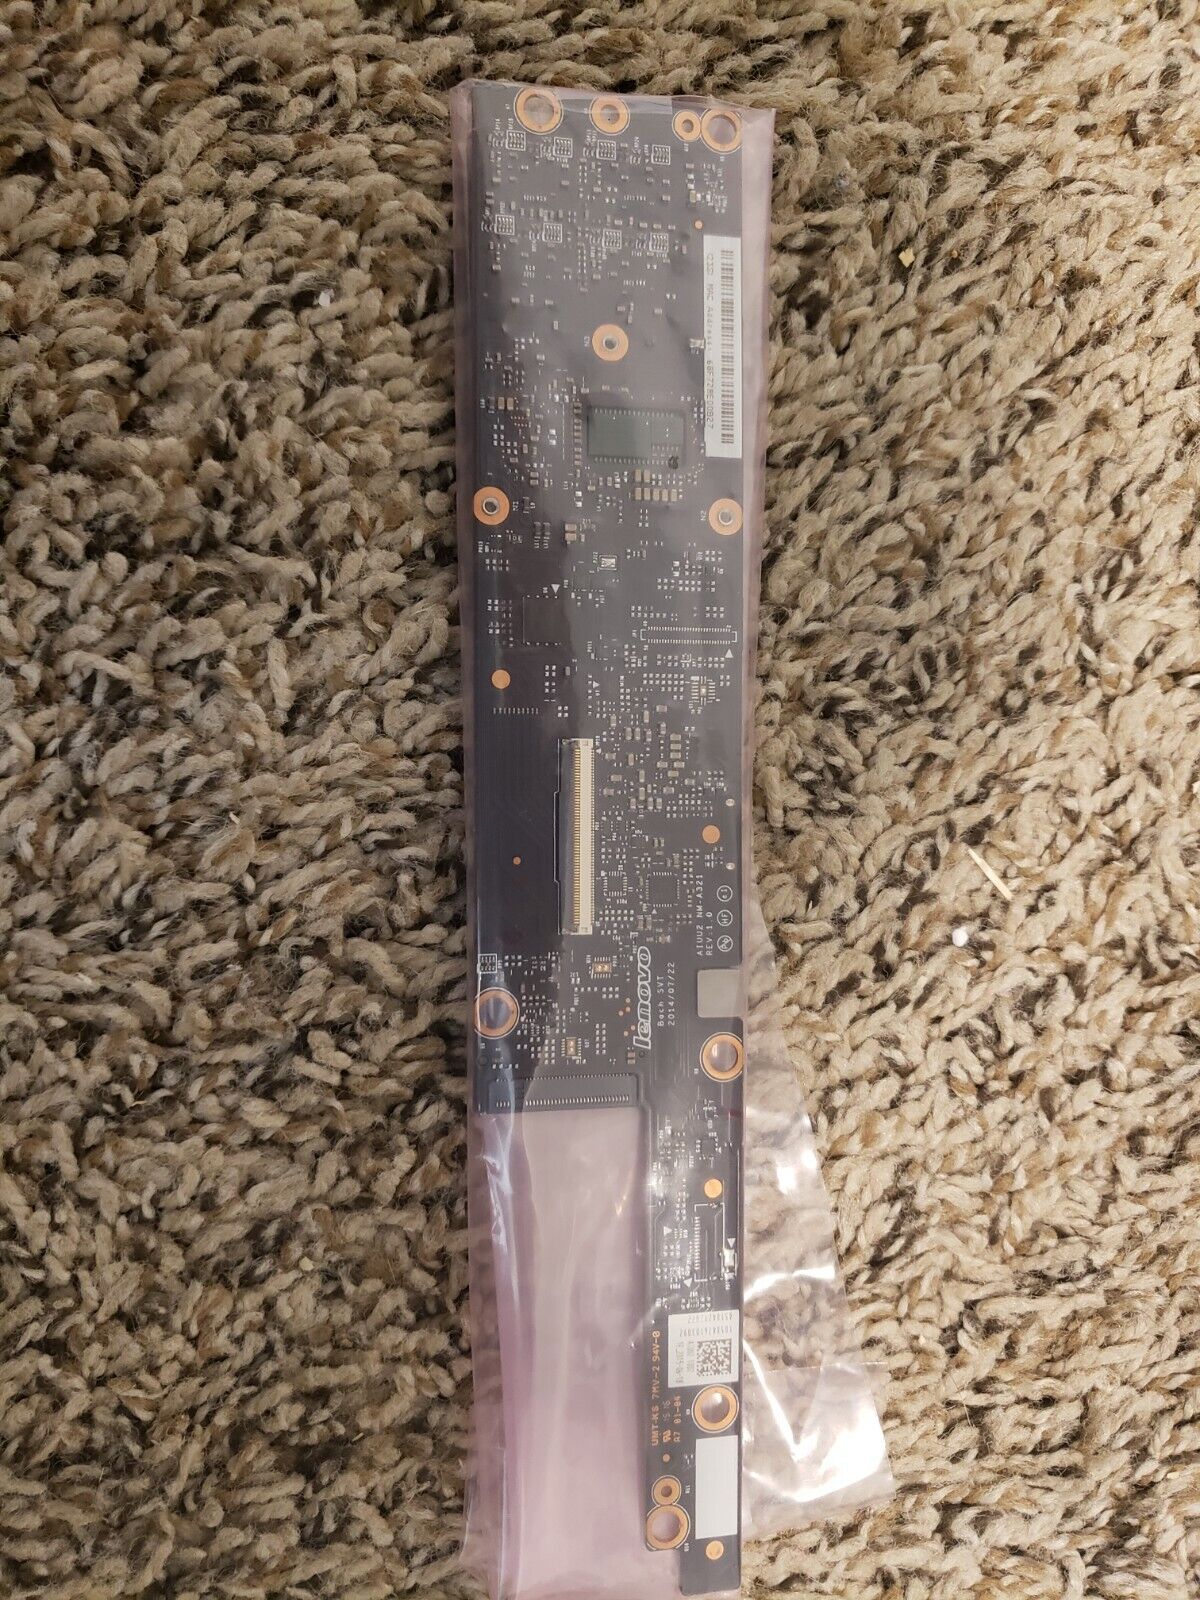 Lenovo YOGA 3 Pro 1370 80HE M-5Y71 8GB Motherboard (No Power Issue)